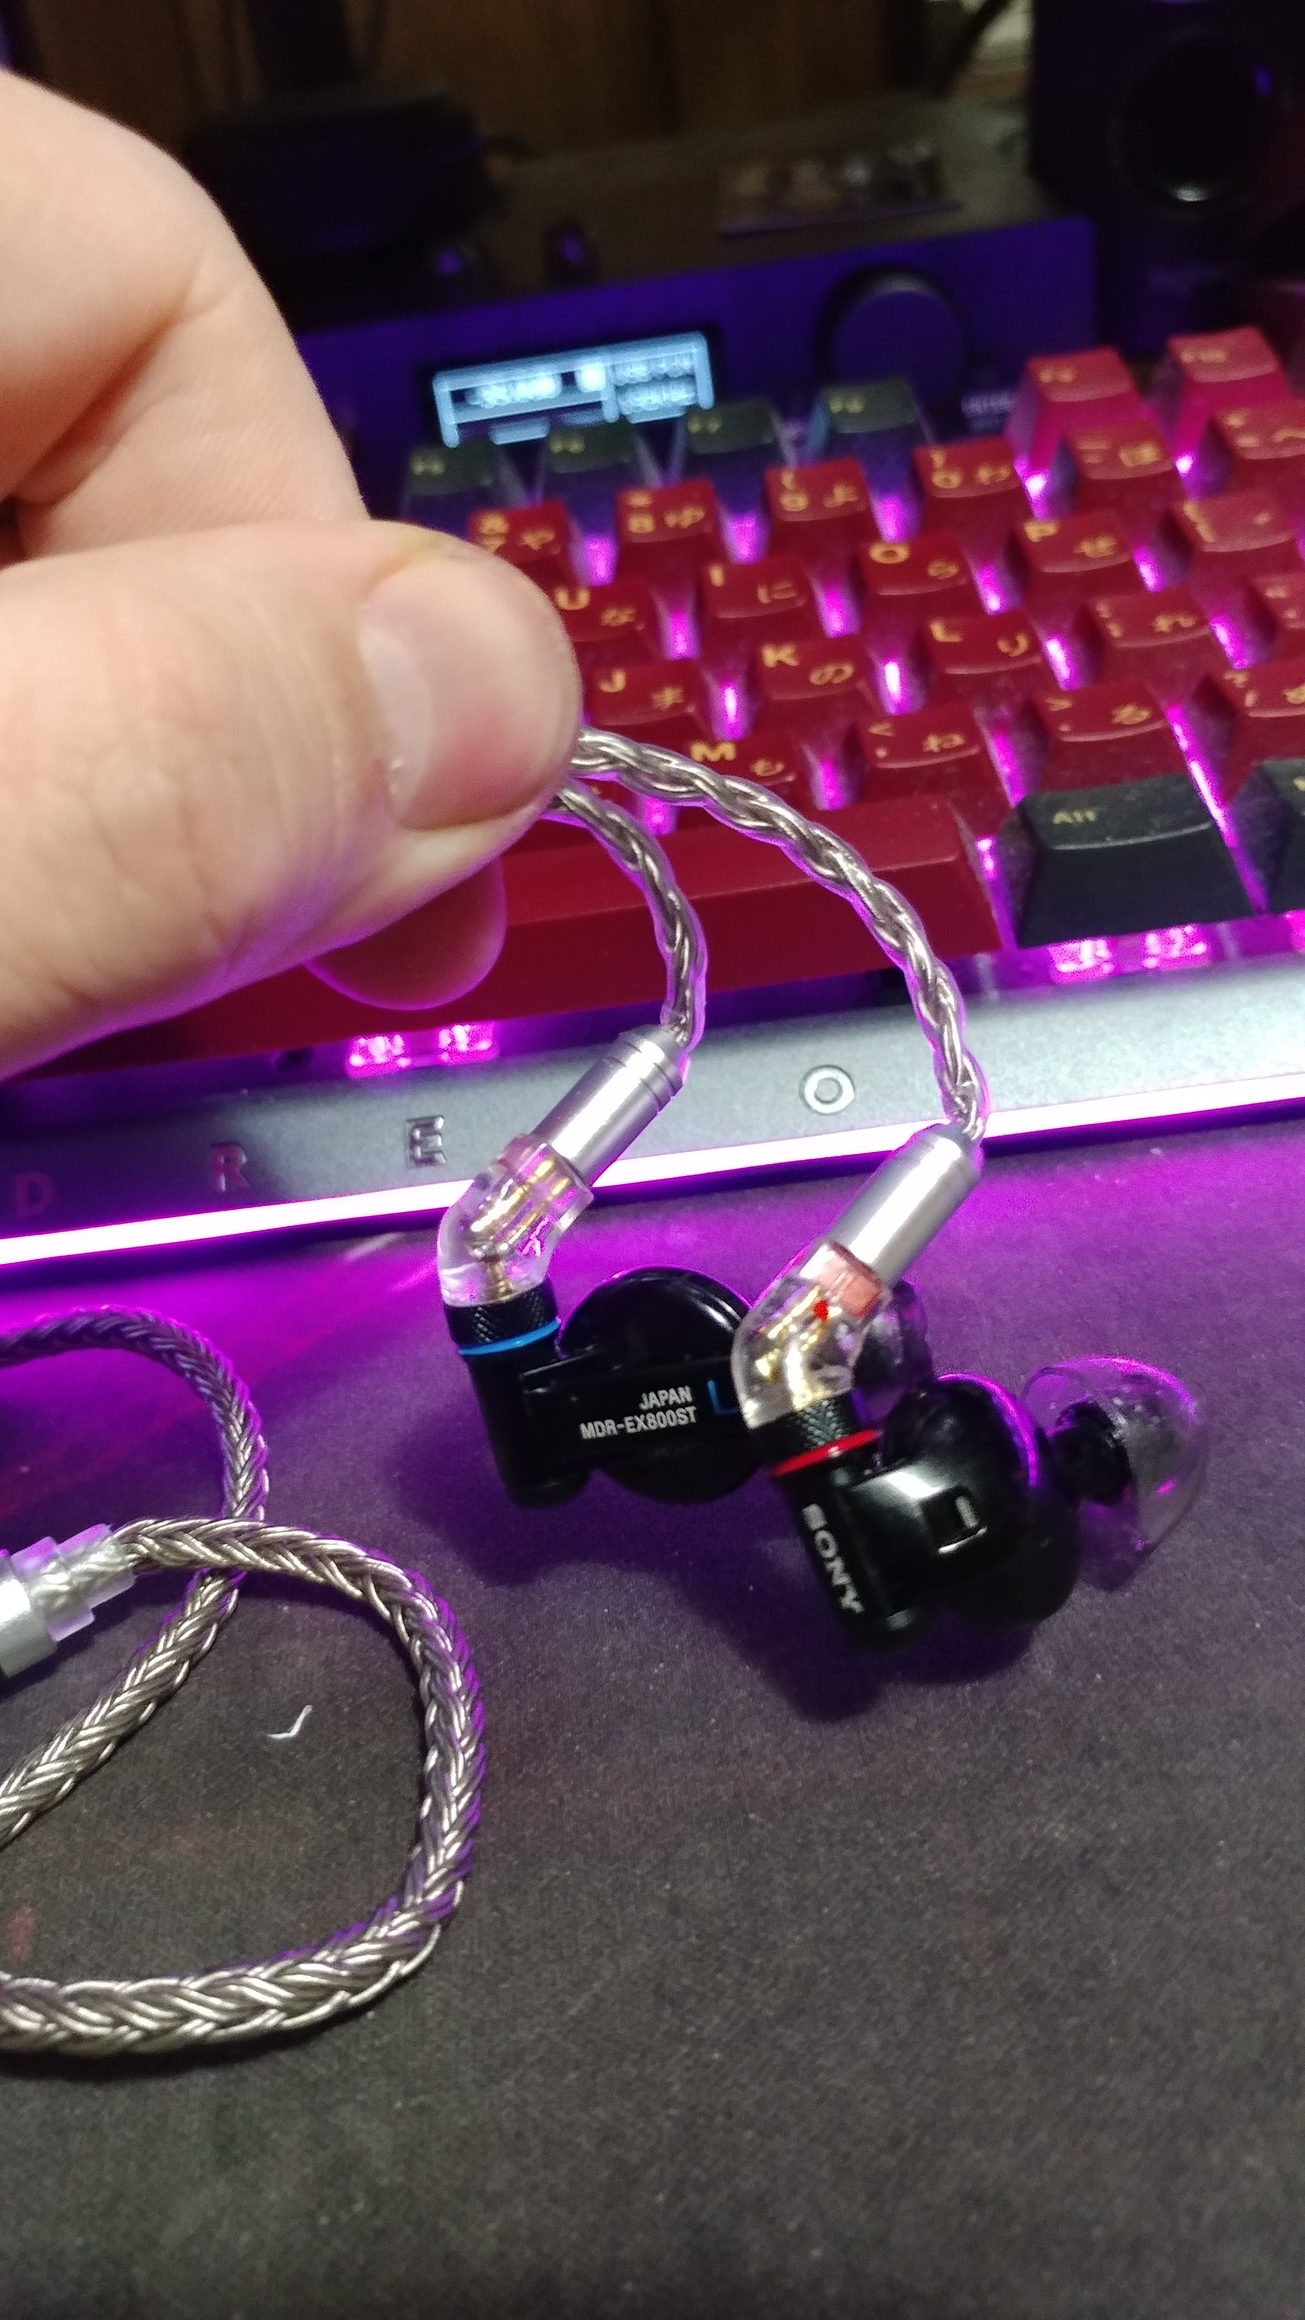 Sony EX800st-2020 - In-Ear Monitors (IEM) - HifiGuides Forums